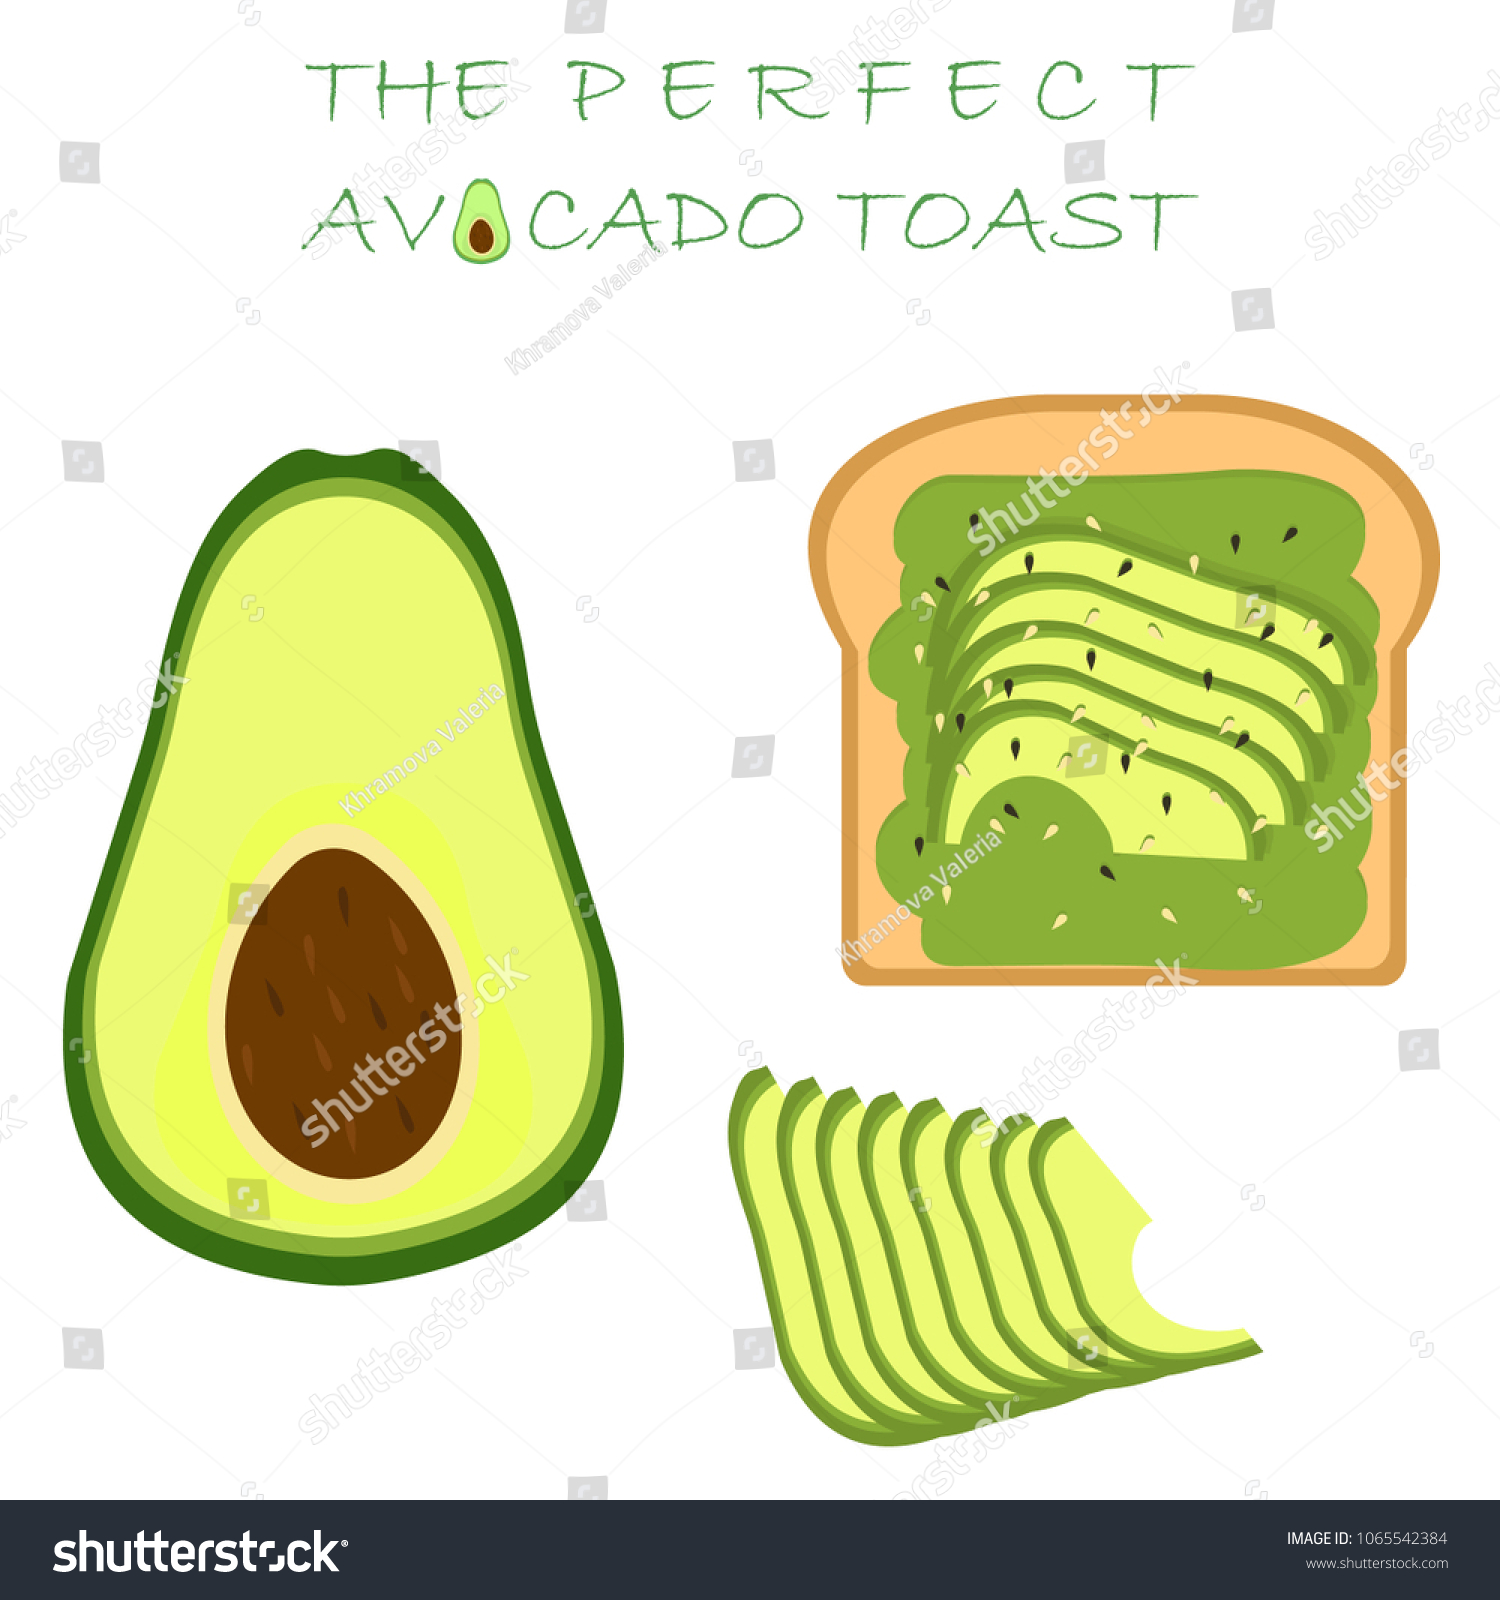 SVG of Avocado toast, avocado cut in half and pieces, chopped and smeared on fresh bread with sesame seeds and seasonings, ripe avocado slices isolated on white background, delicious ripe avocado set, vector svg